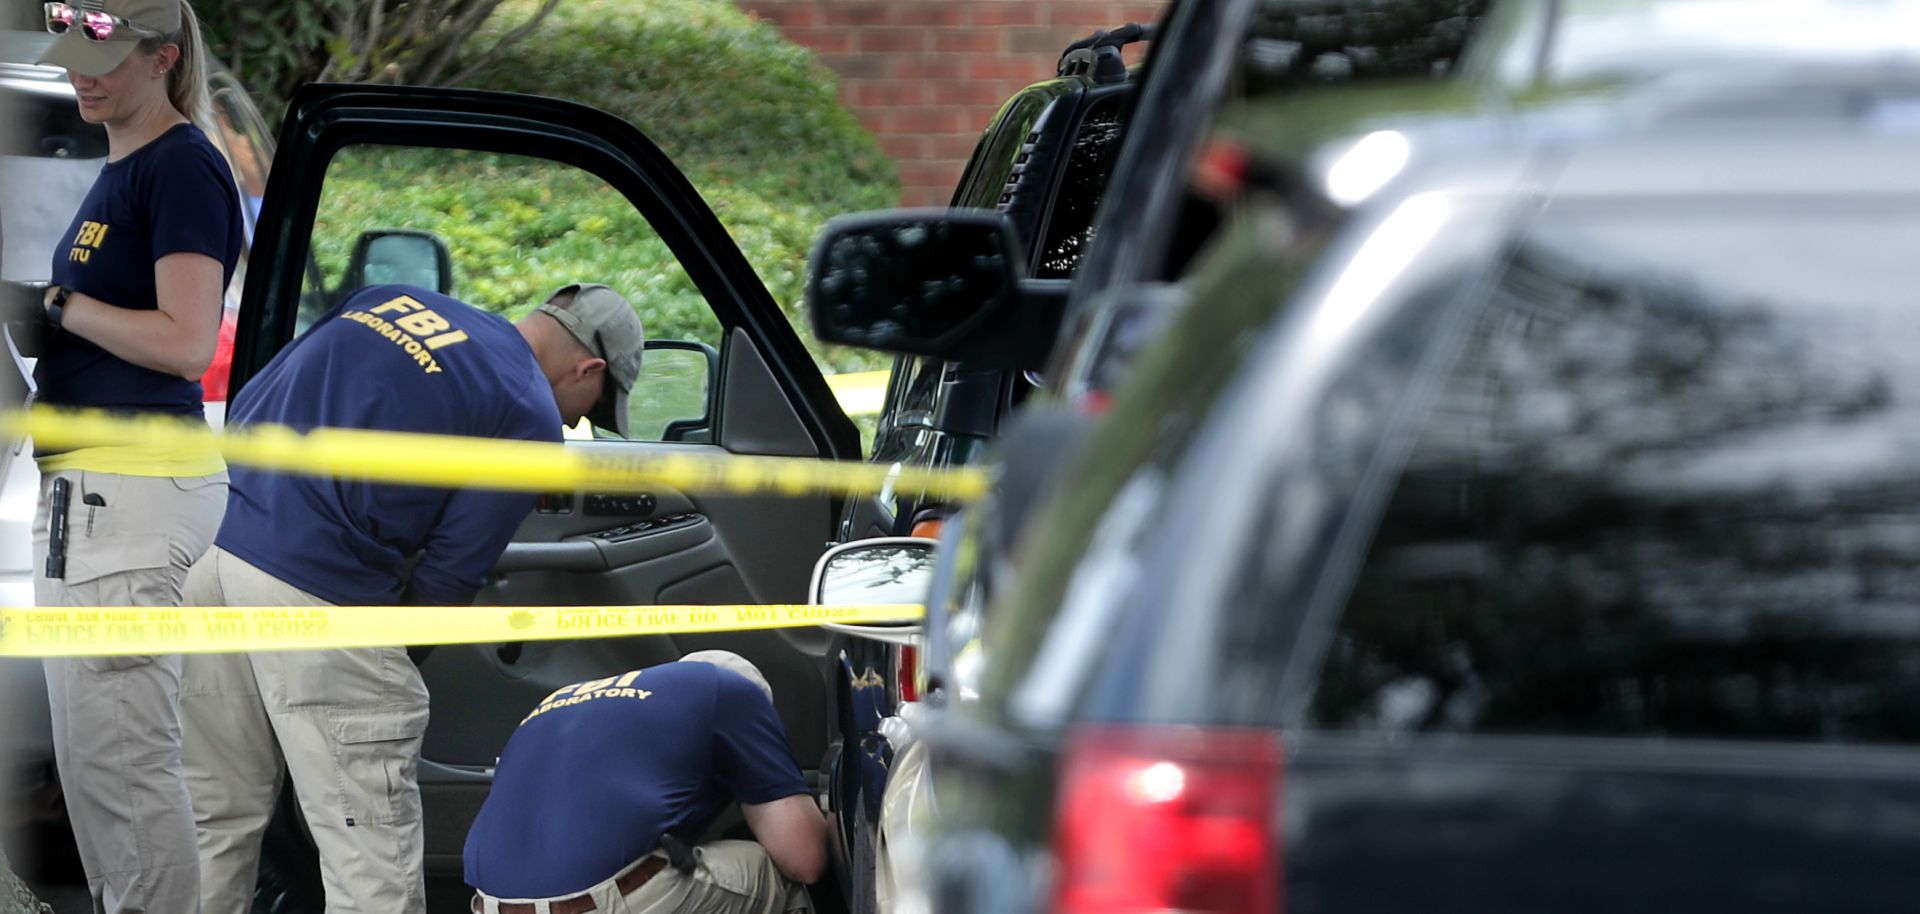 Crime scene experts from the FBI remove evidence from a black SUV on the day after a mass shooting at the Virginia Beach Municipal Center on June 1, 2019.